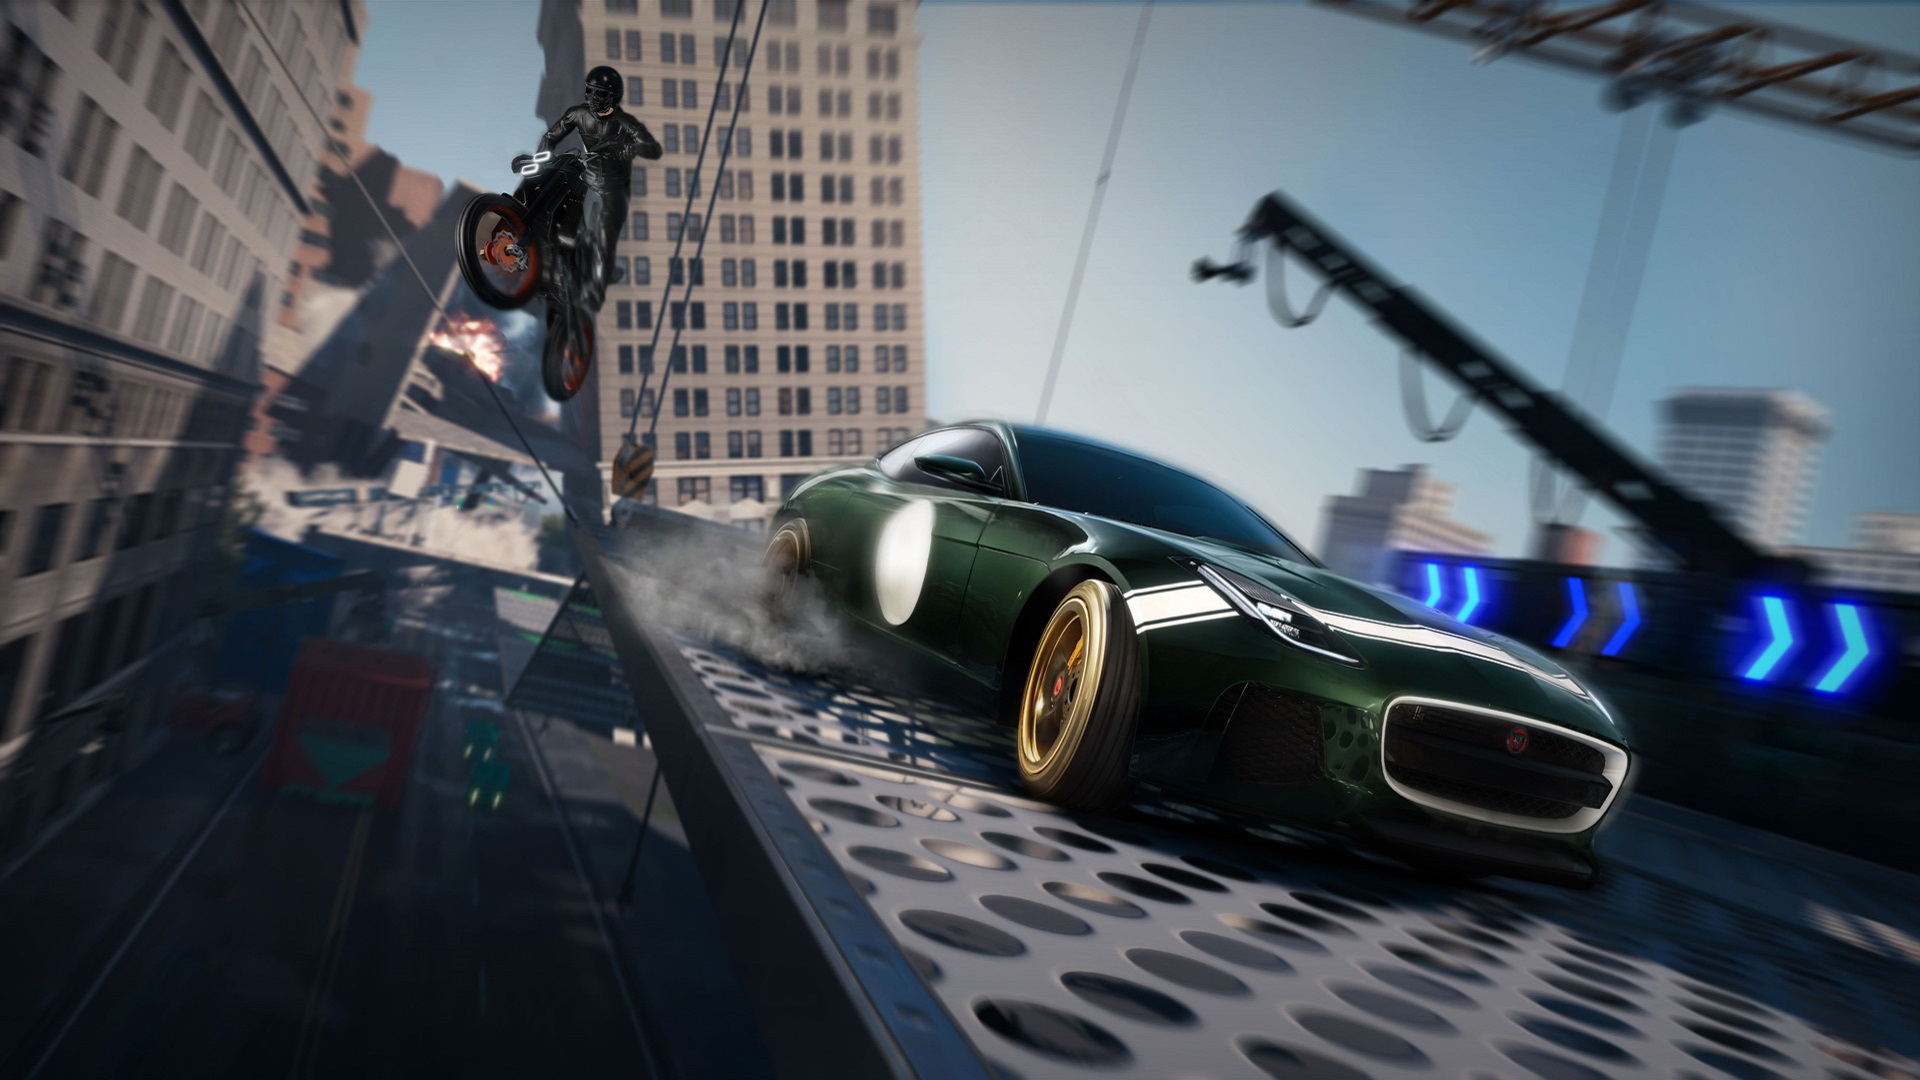 Buy The Crew 2 Standard Edition for PC | Ubisoft Official Store